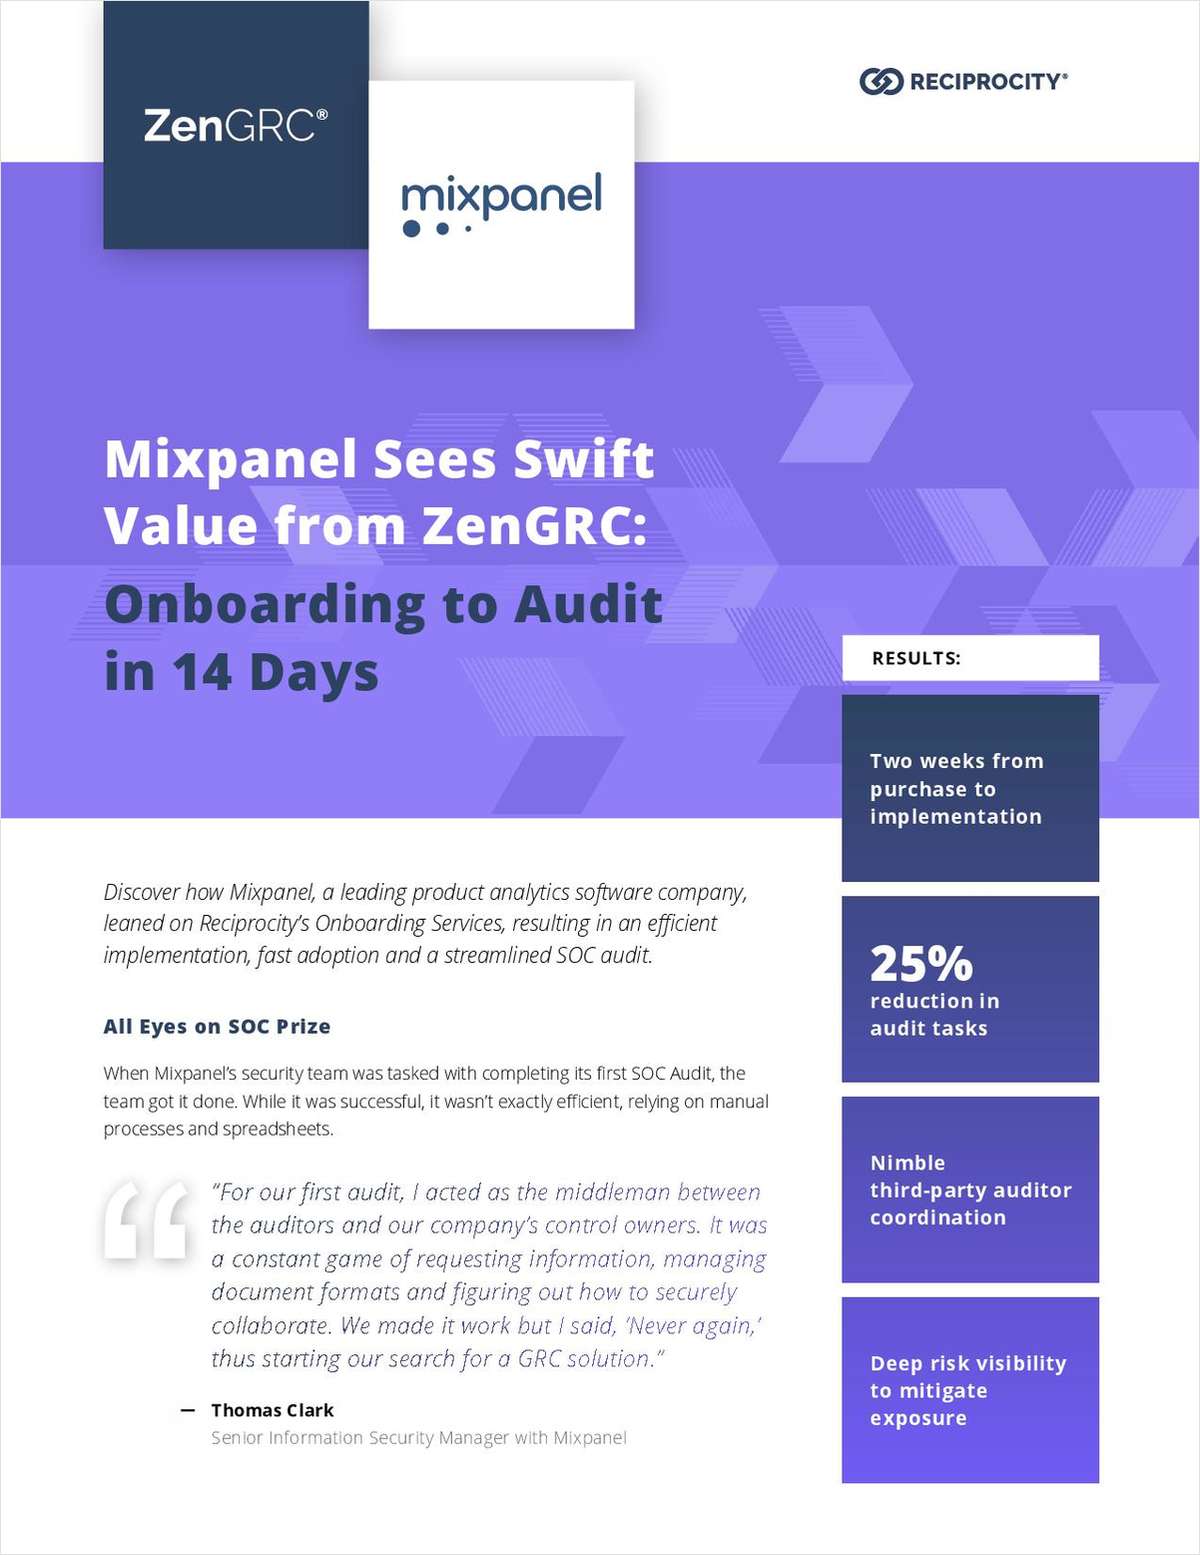 Mixpanel Sees Swift Value from ZenGRC: Onboarding to Audit in 14 Days